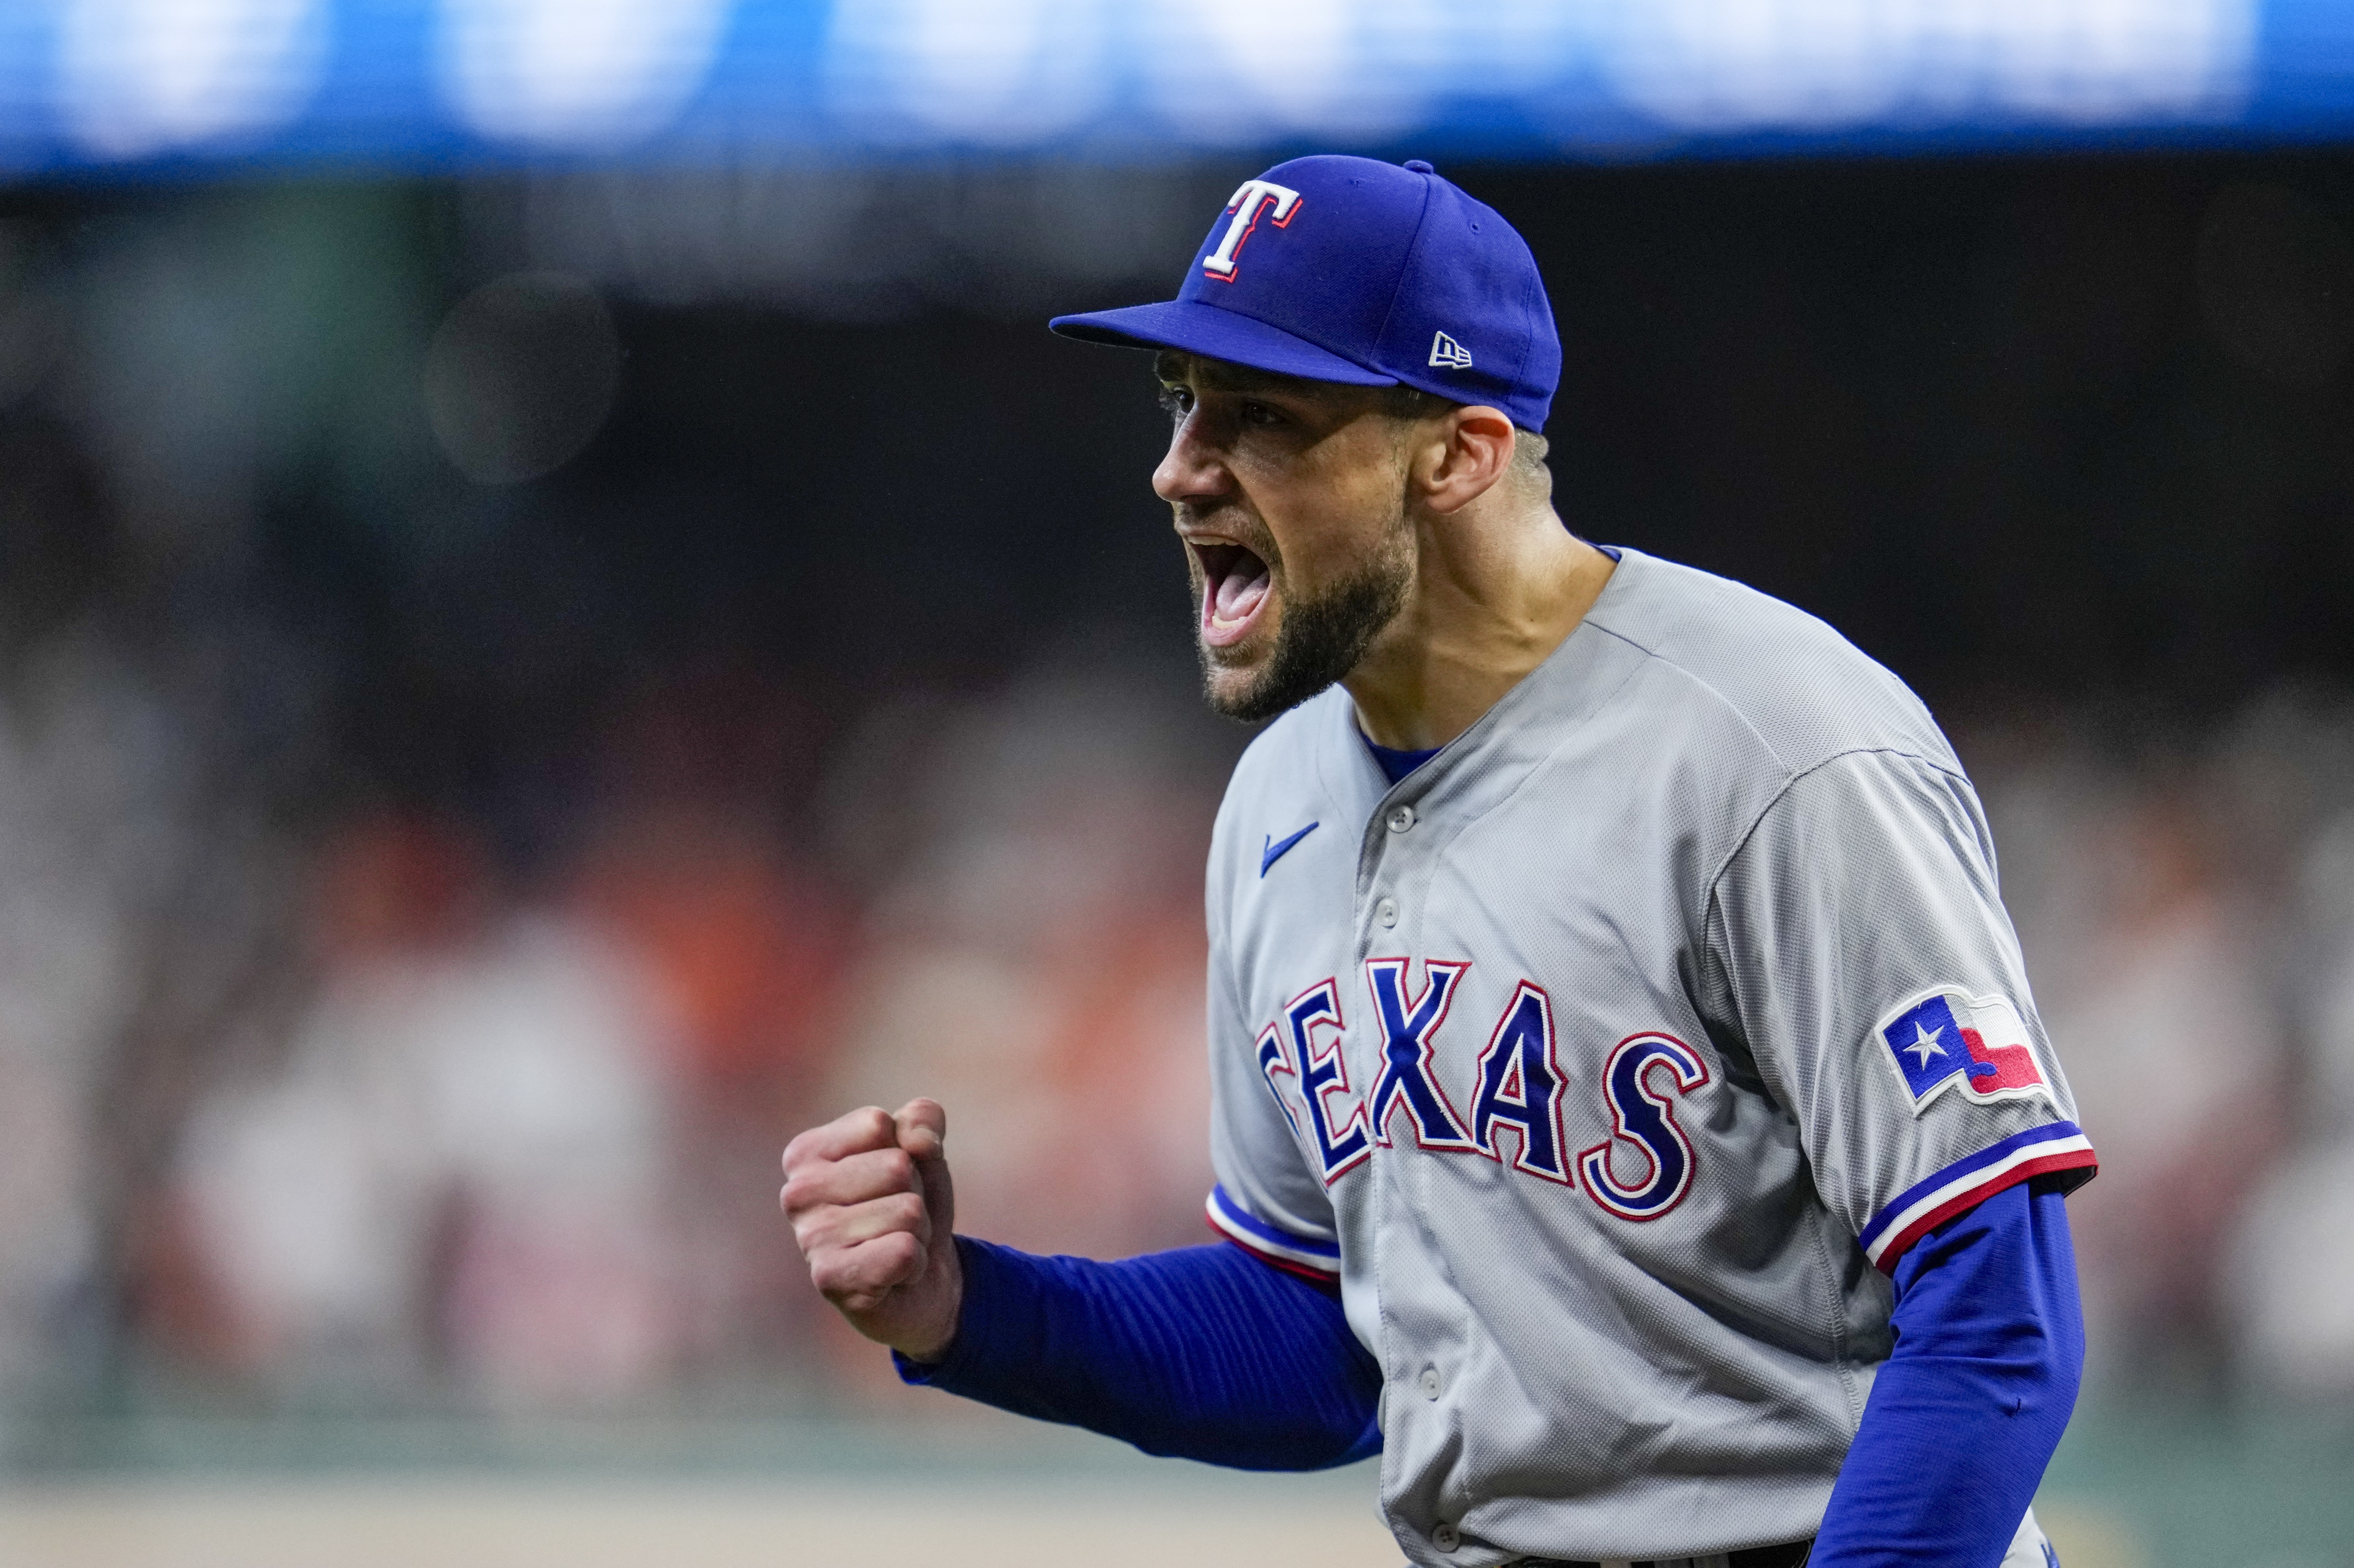 What time, TV channel is Texas Rangers vs. Houston Astros ALCS